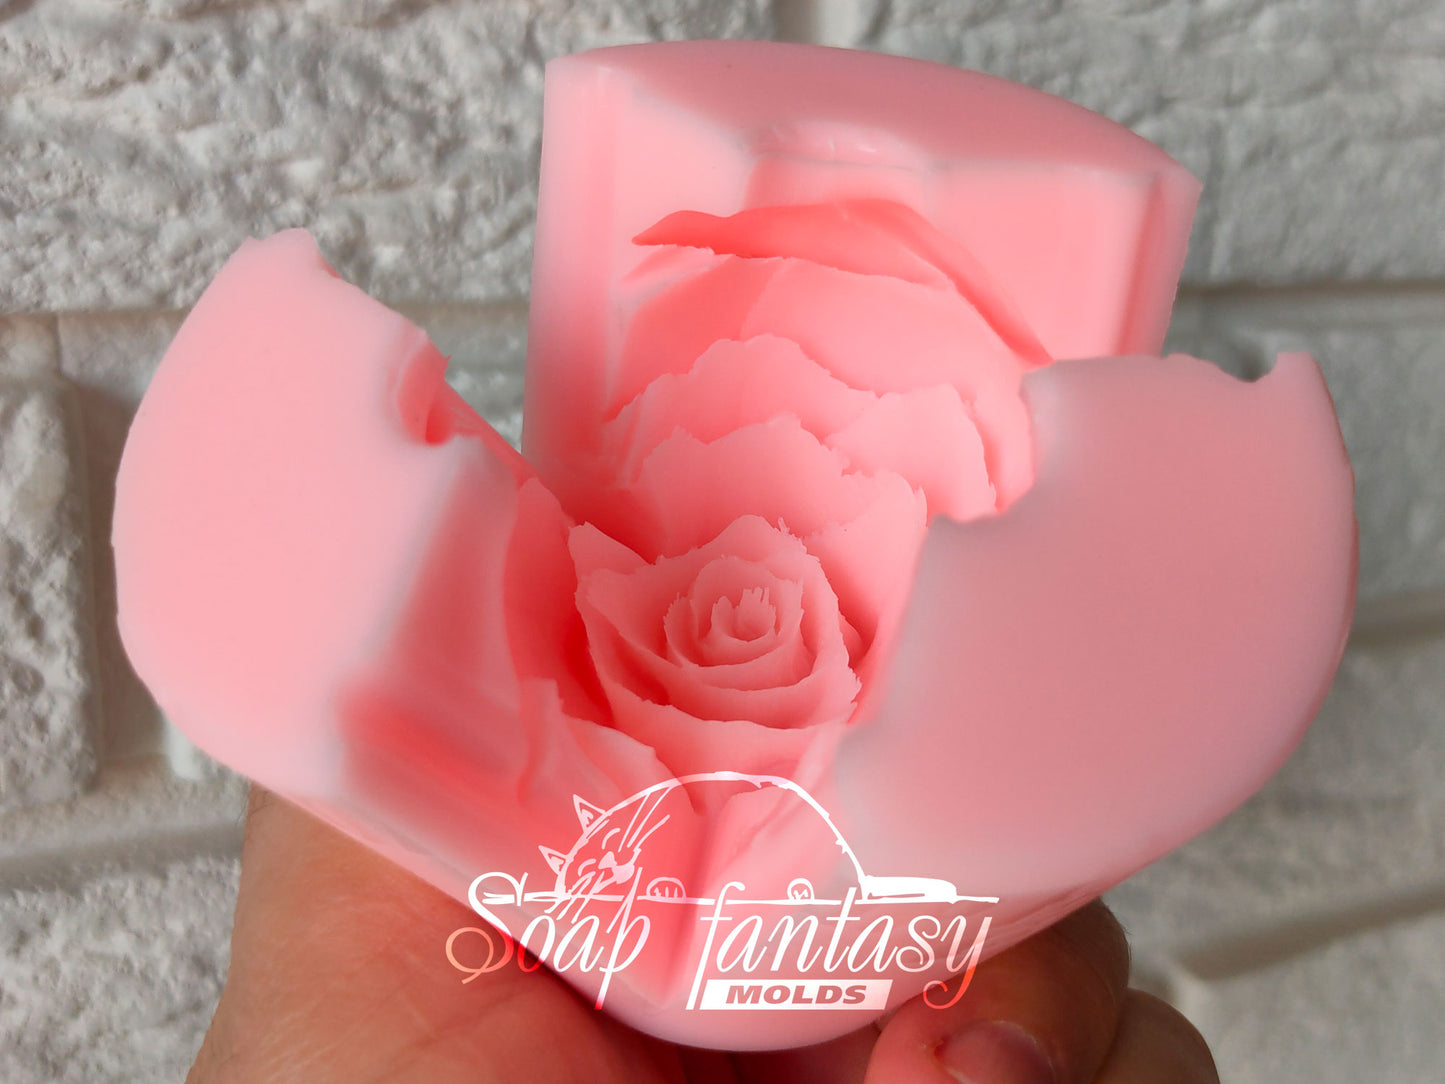 Rose "Iguazu" flower silicone mold for soap making and candle making.